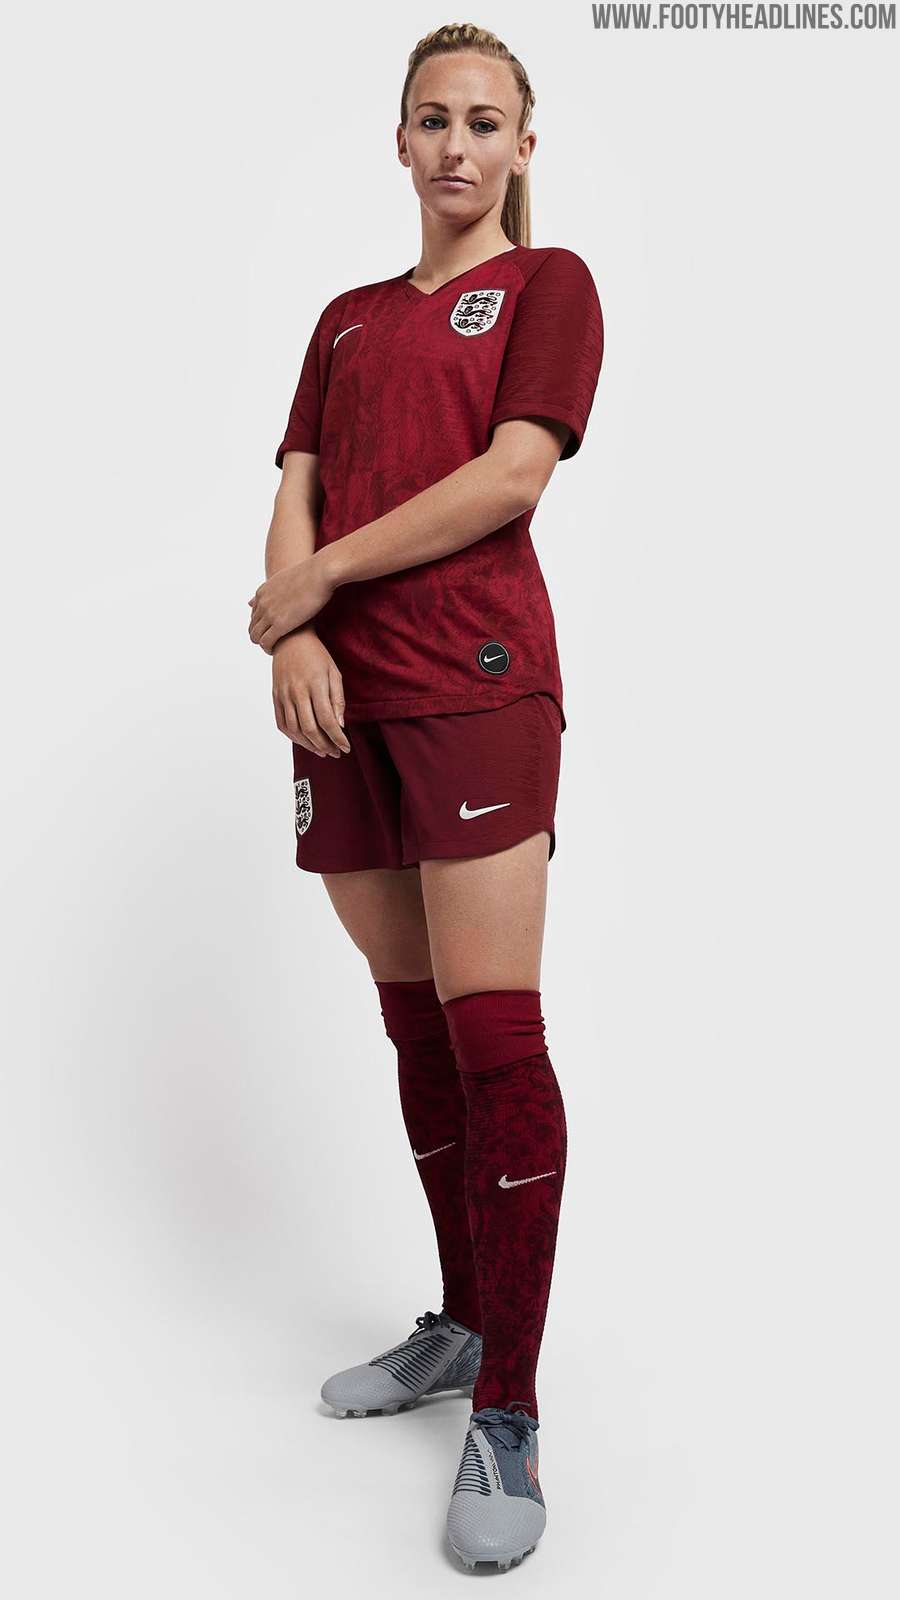 Stunning Nike England 2019 Women's World Cup Away Kit Released Footy